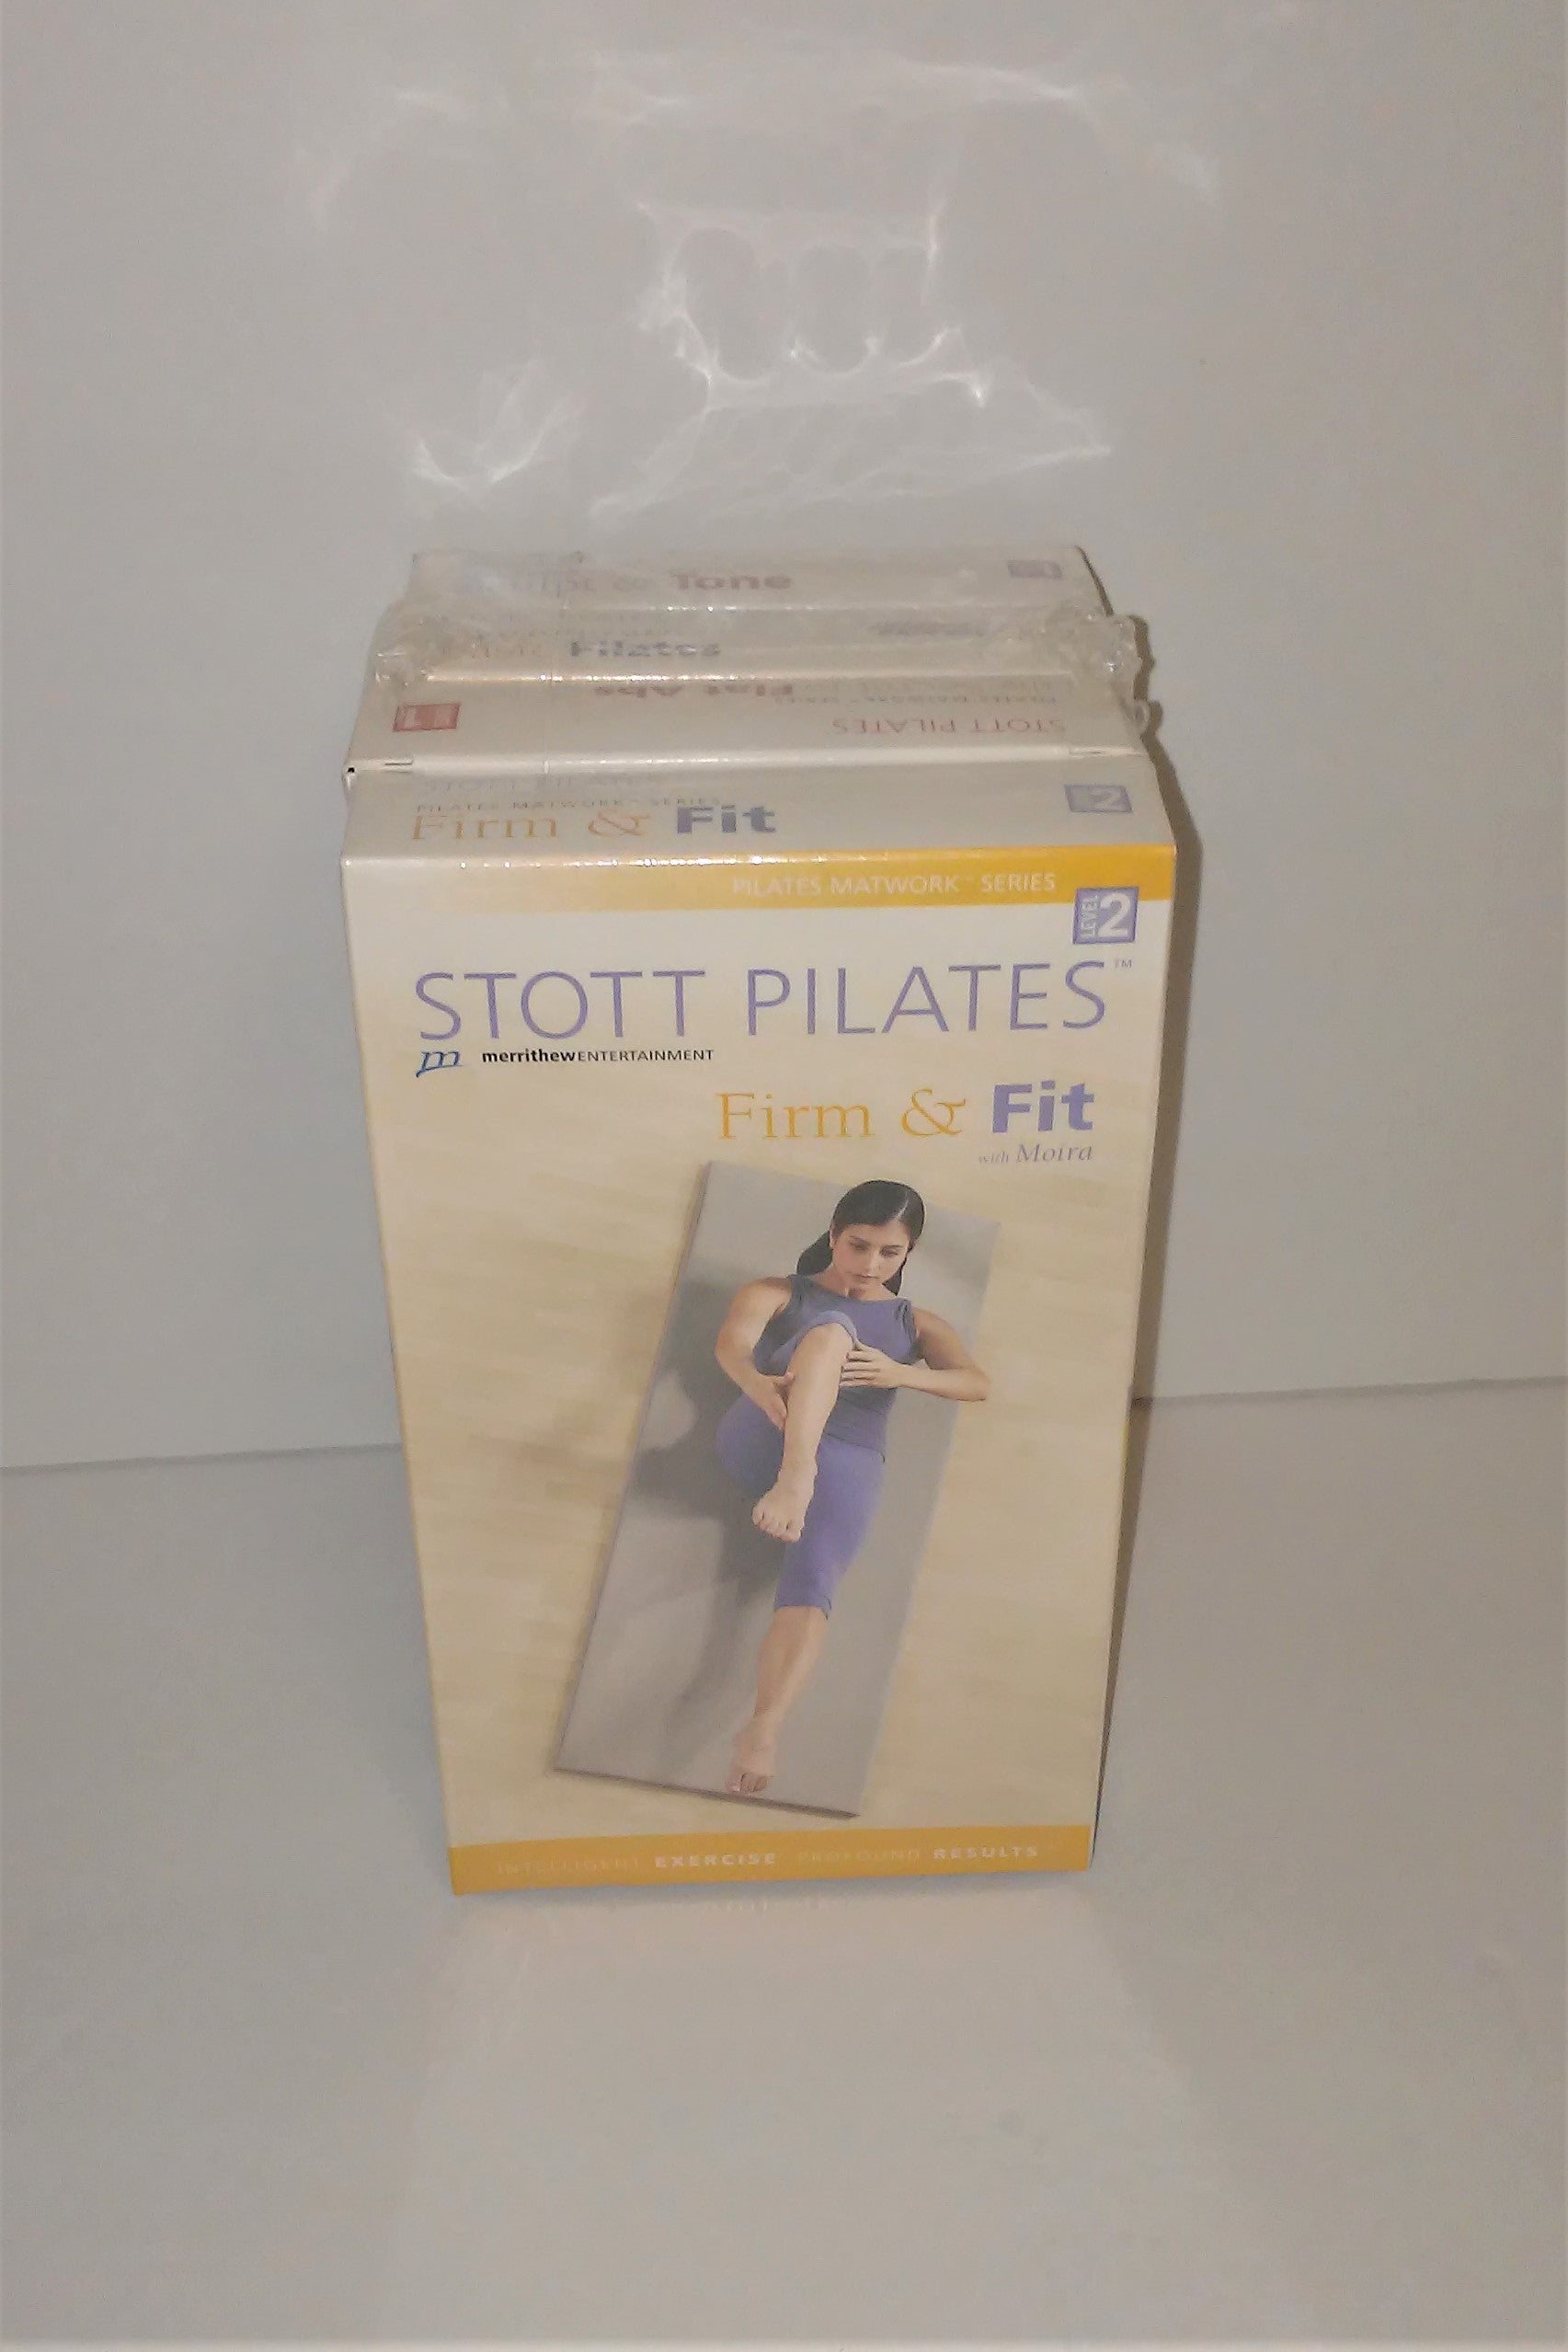 STOTT PILATES 4 Pack VHS Tape Set from 2004 – Sandee's Memories &  Collectibles